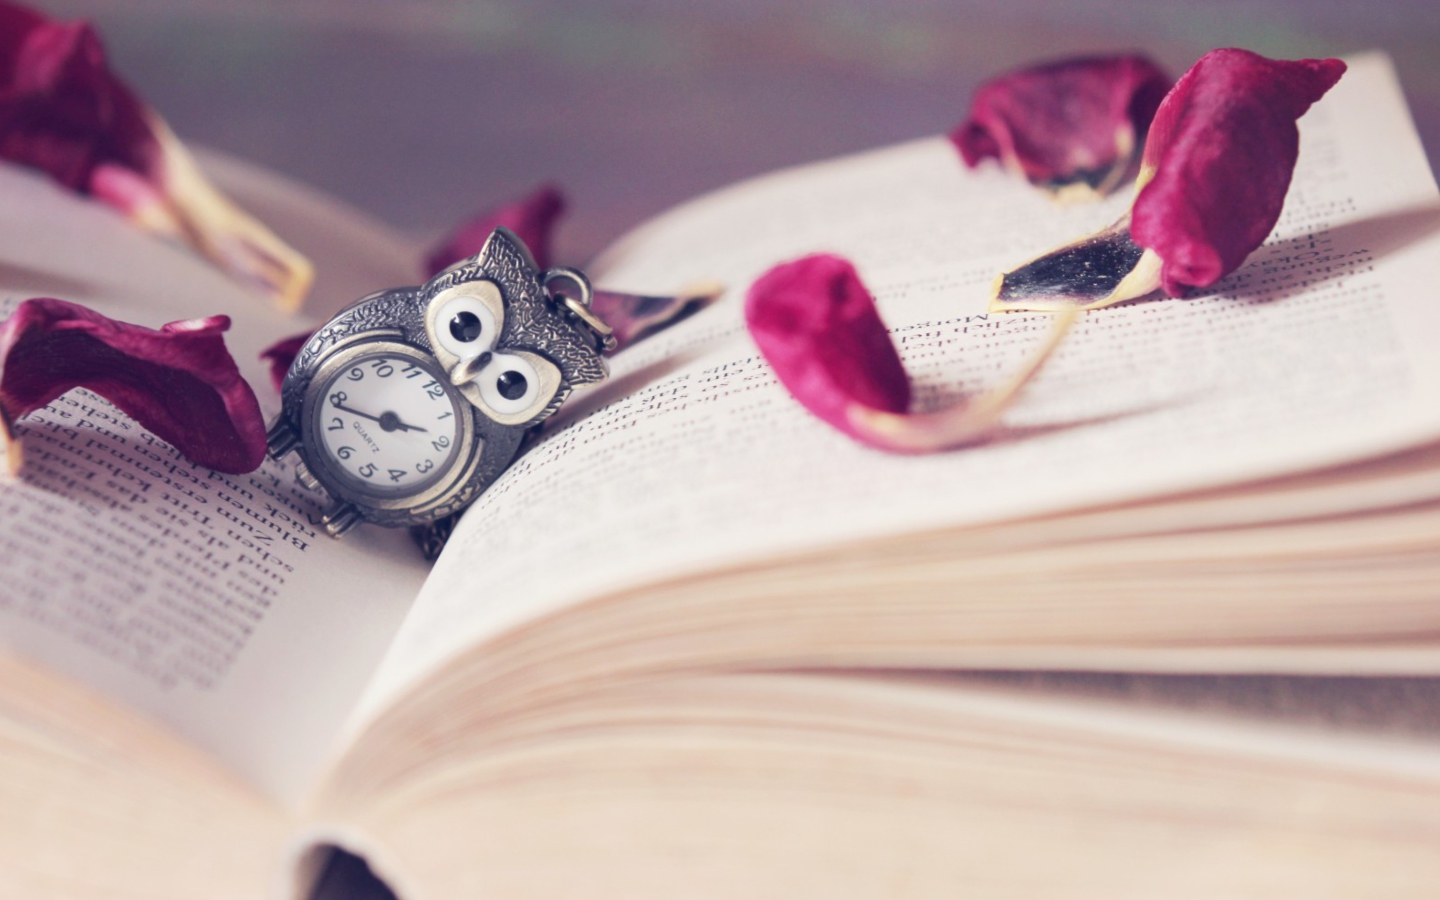 Vintage Owl Watch And Book wallpaper 1440x900